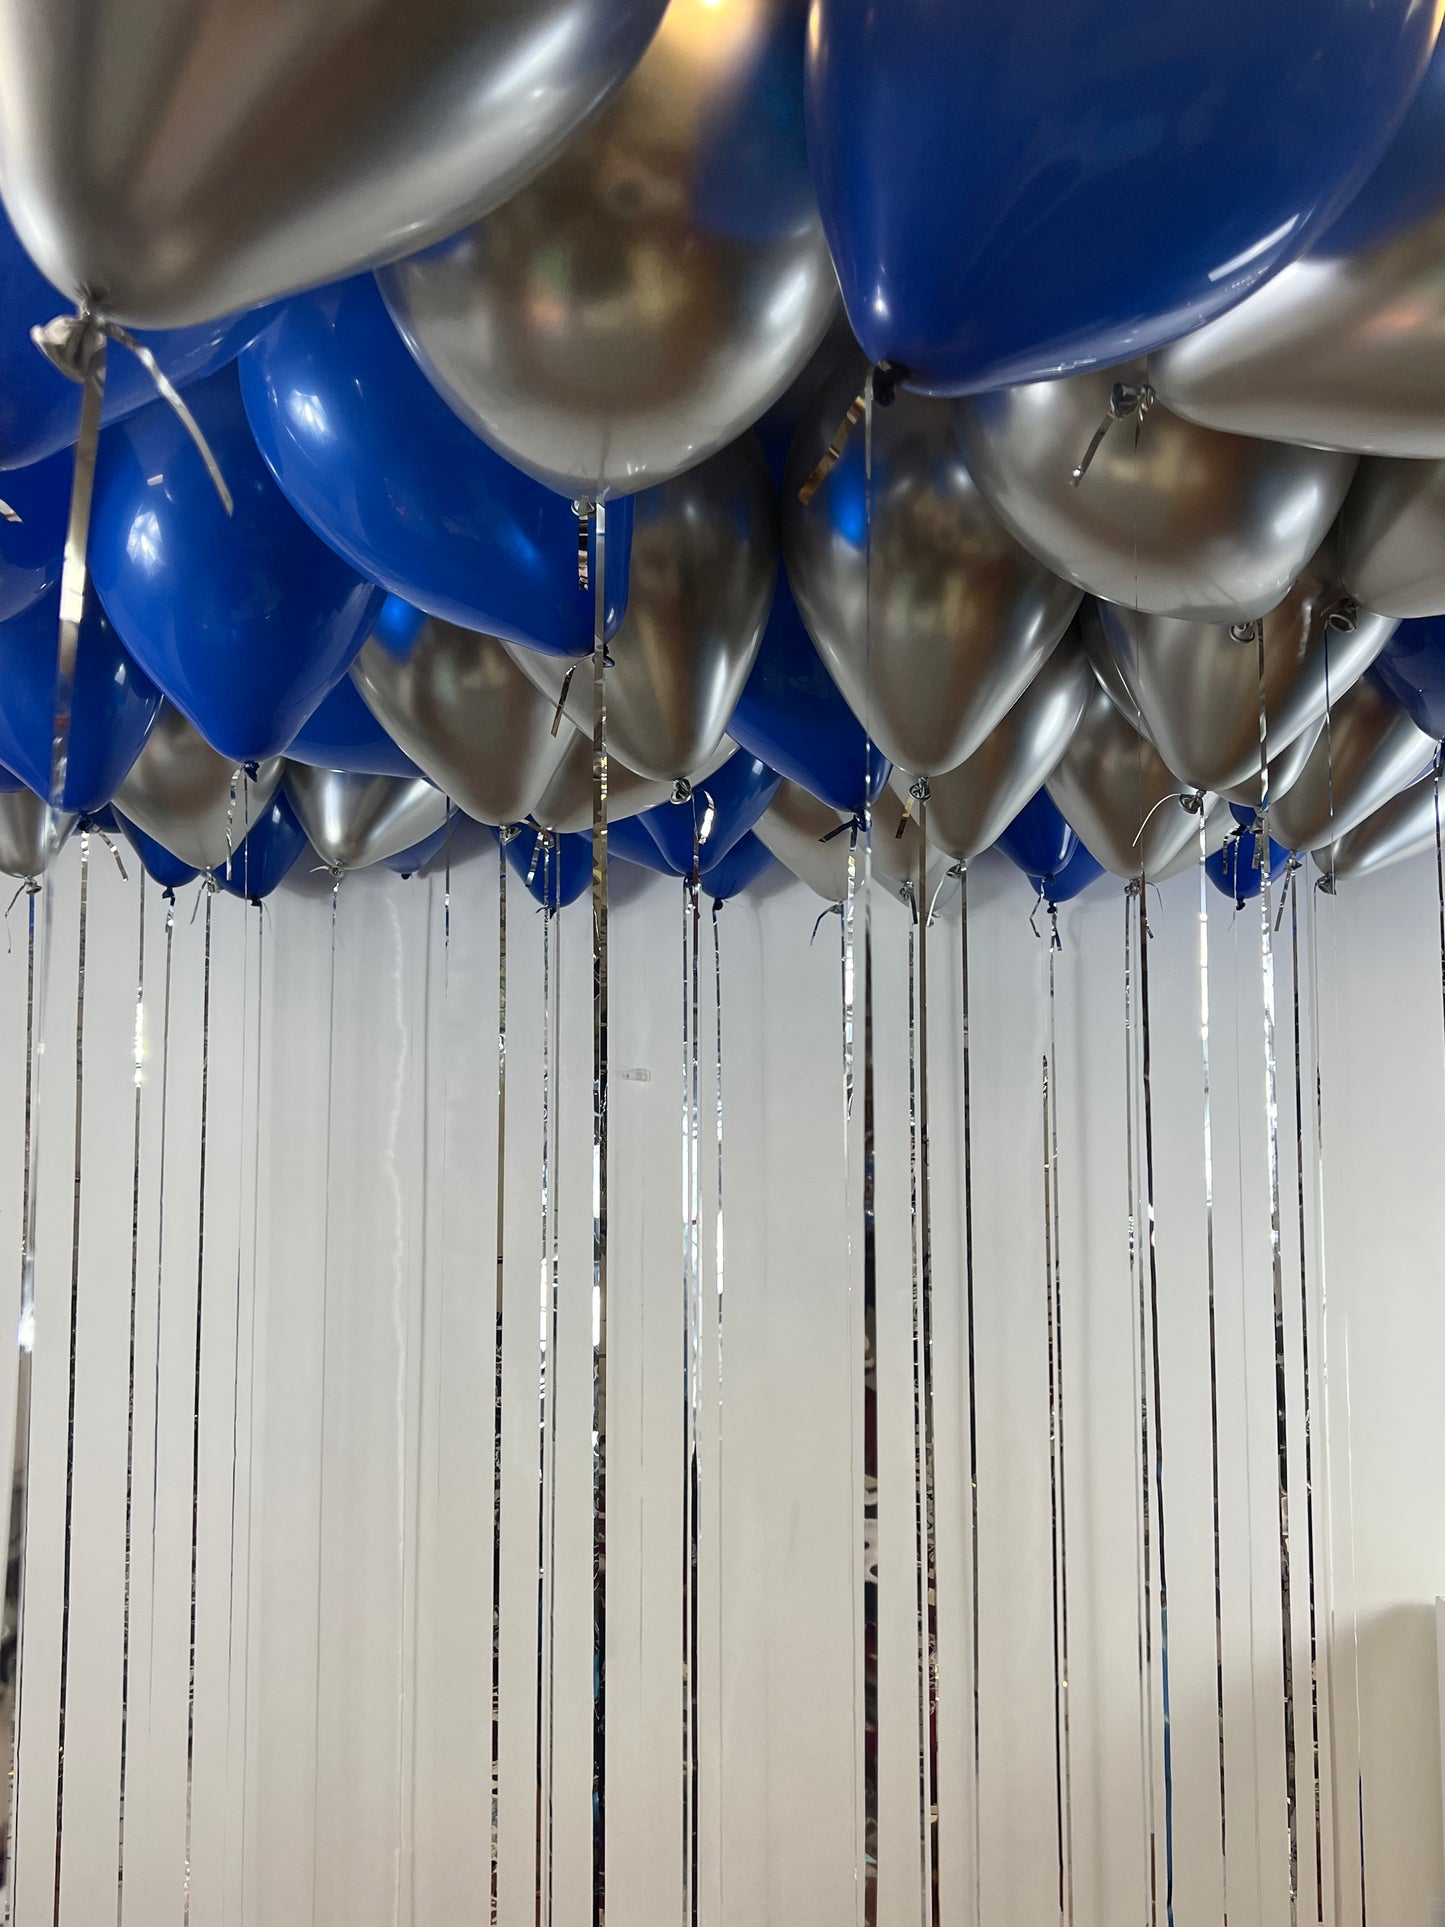 CEILING BALLOONS